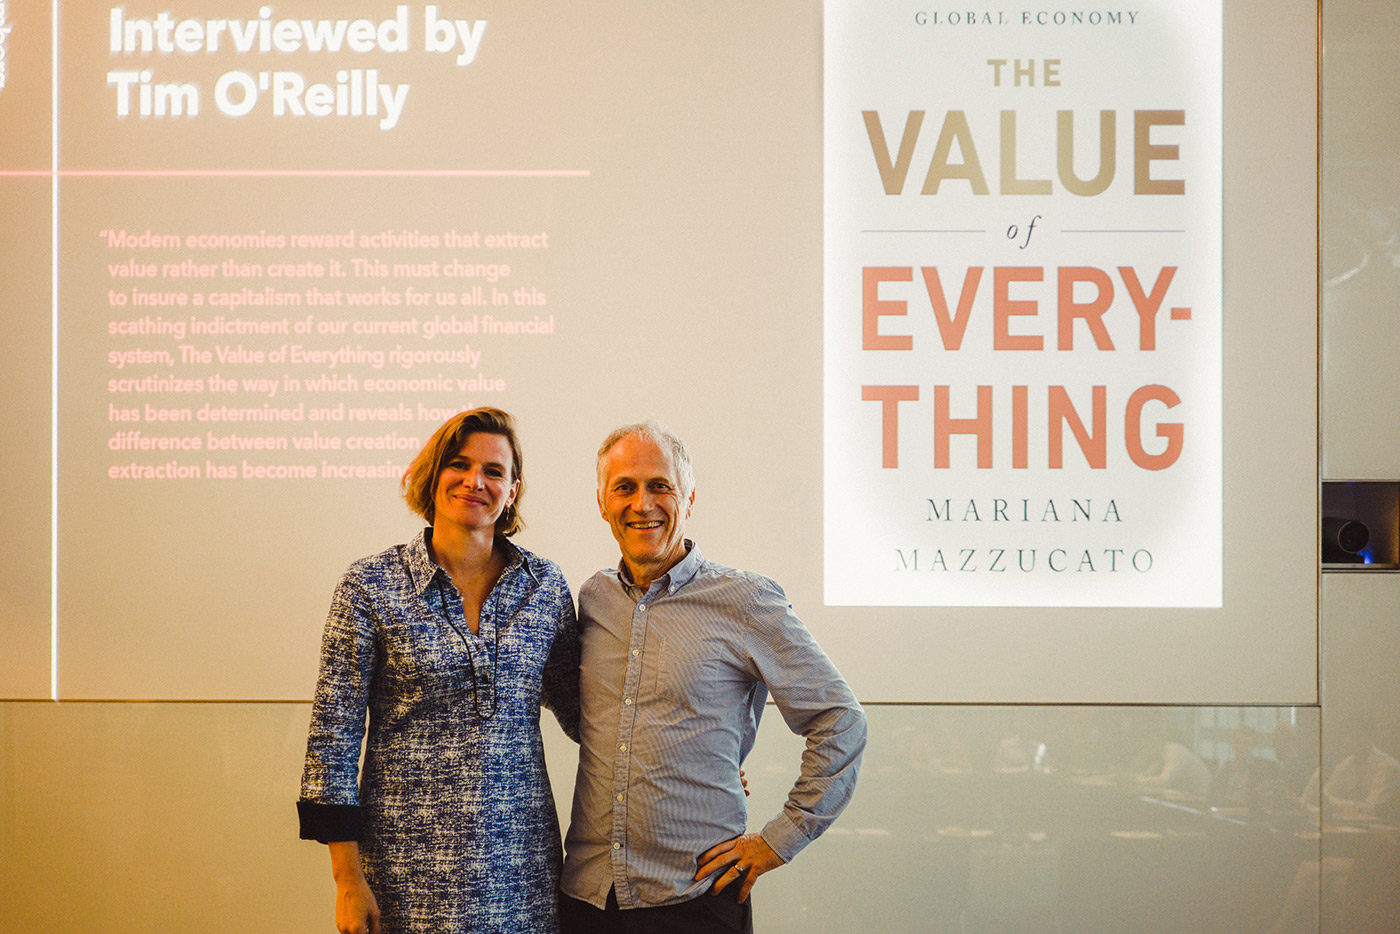 Mariana Mazzucato and Tim O'Reilly